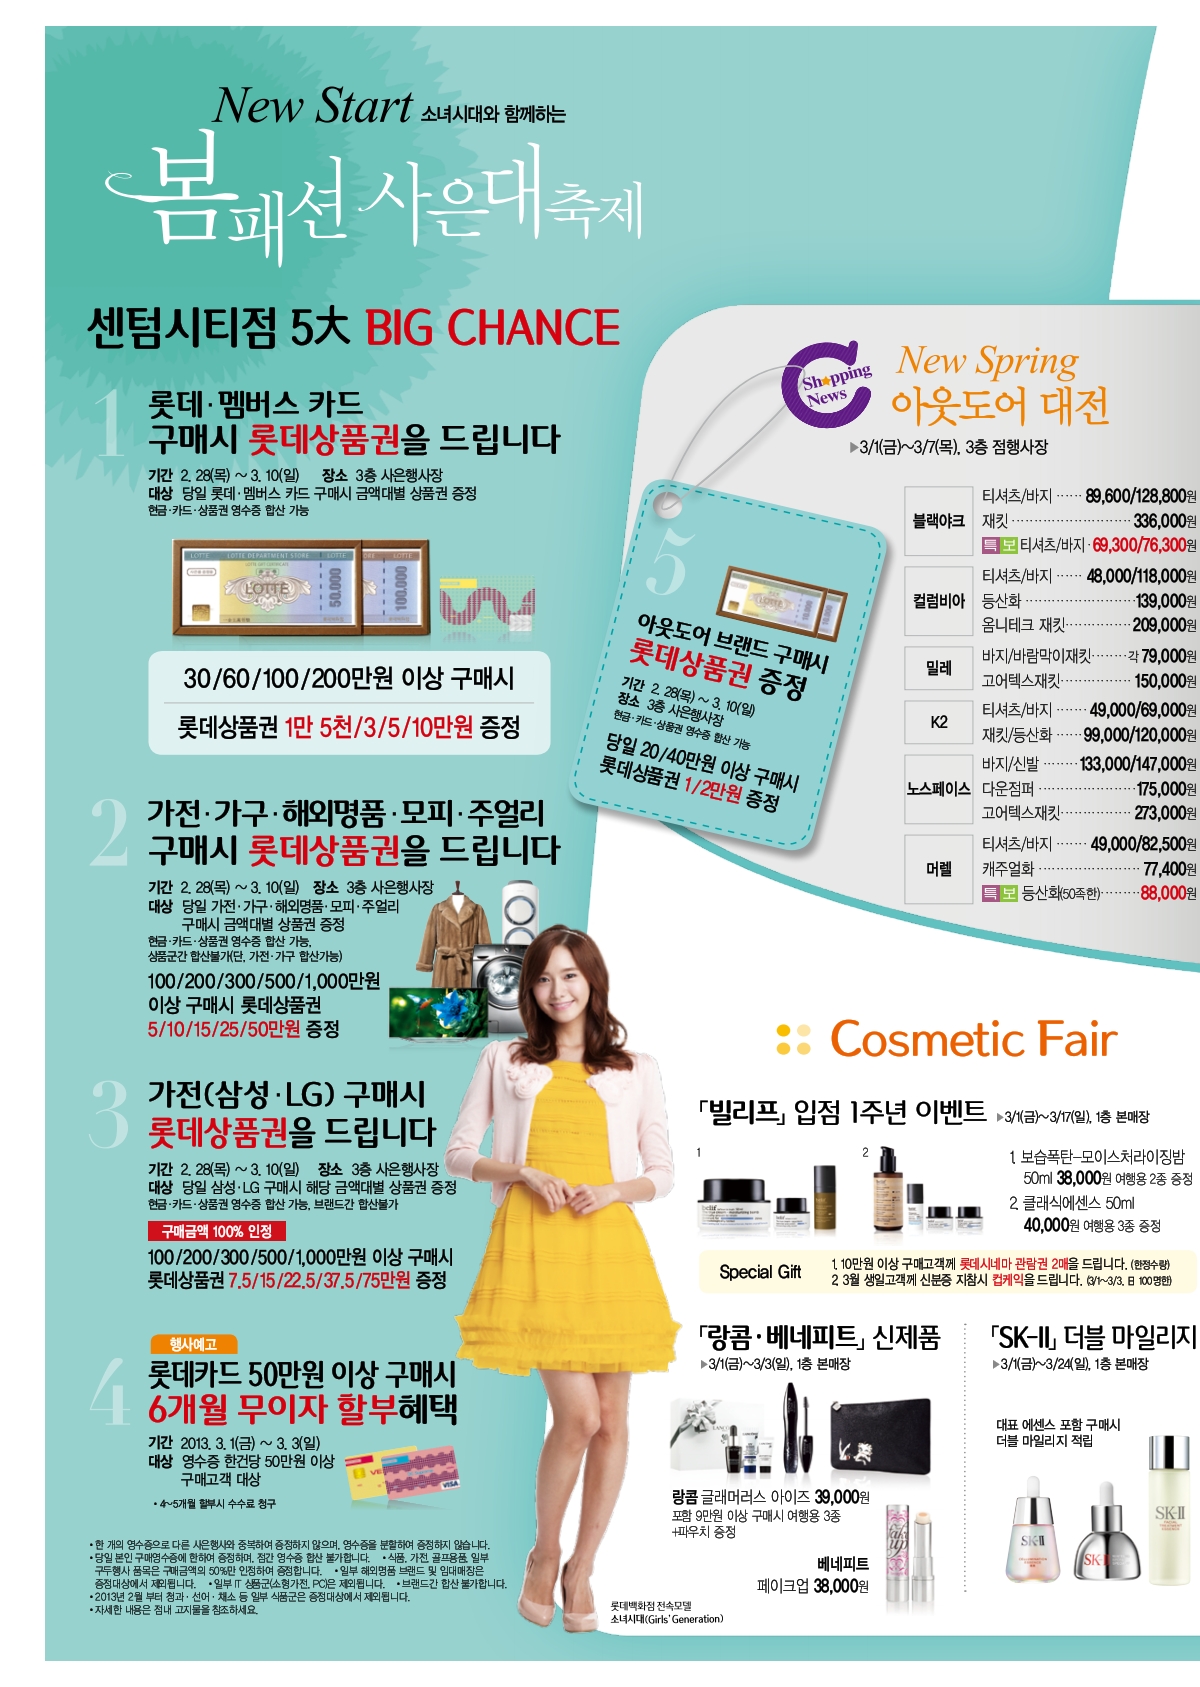 [OTHER][21-07-2012]SNSD @ Lotte Department Store - Page 4 002